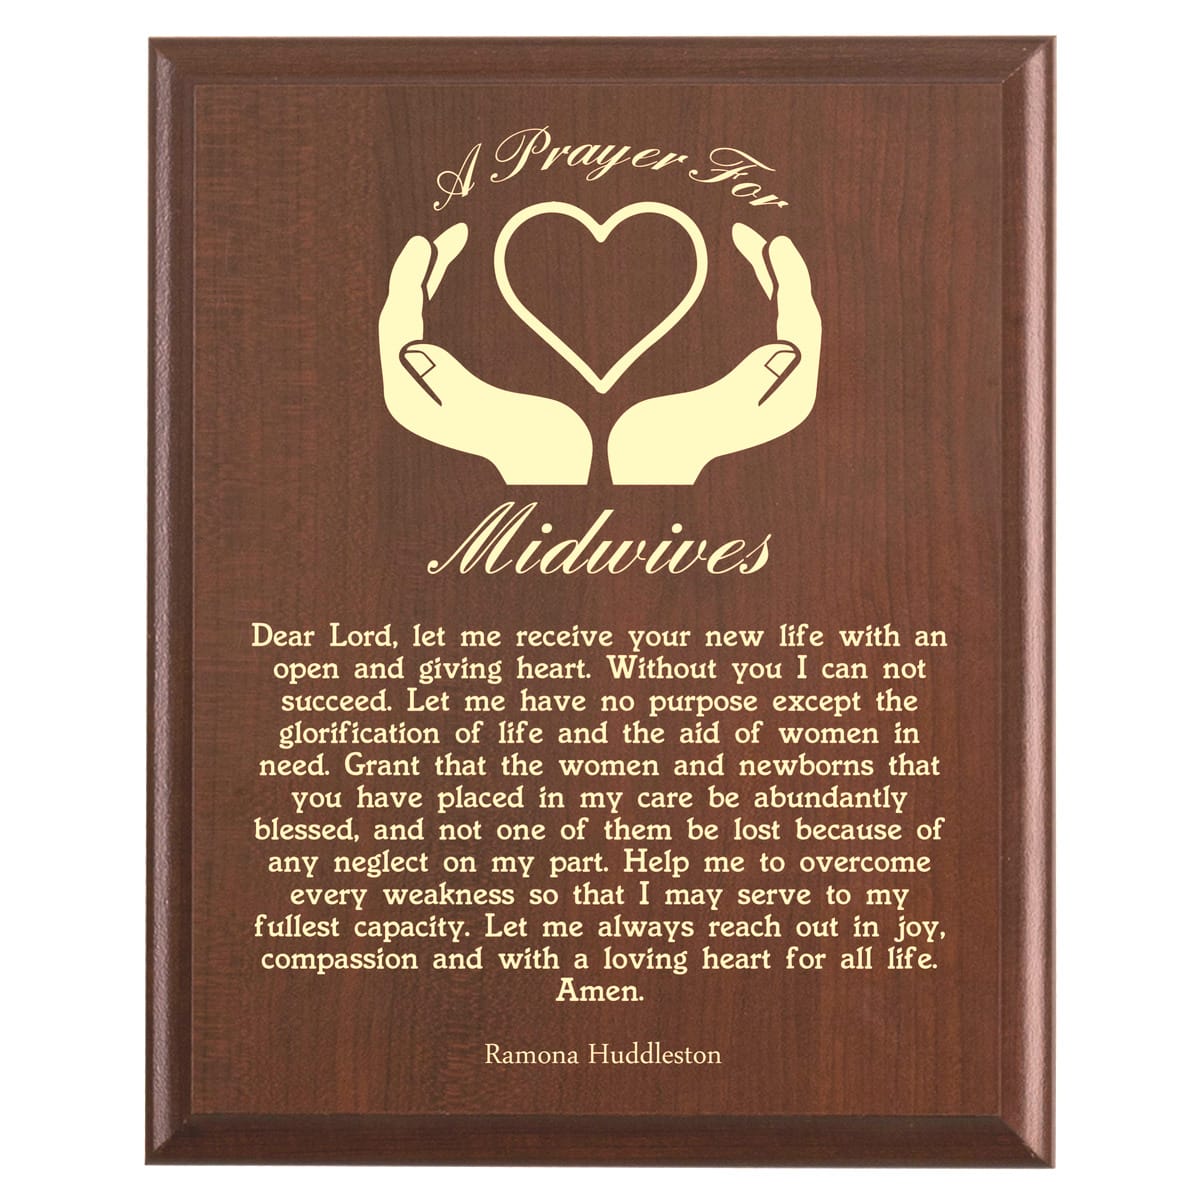 Plaque photo: Midwives Prayer Plaque design with free personalization. Wood style finish with customized text.